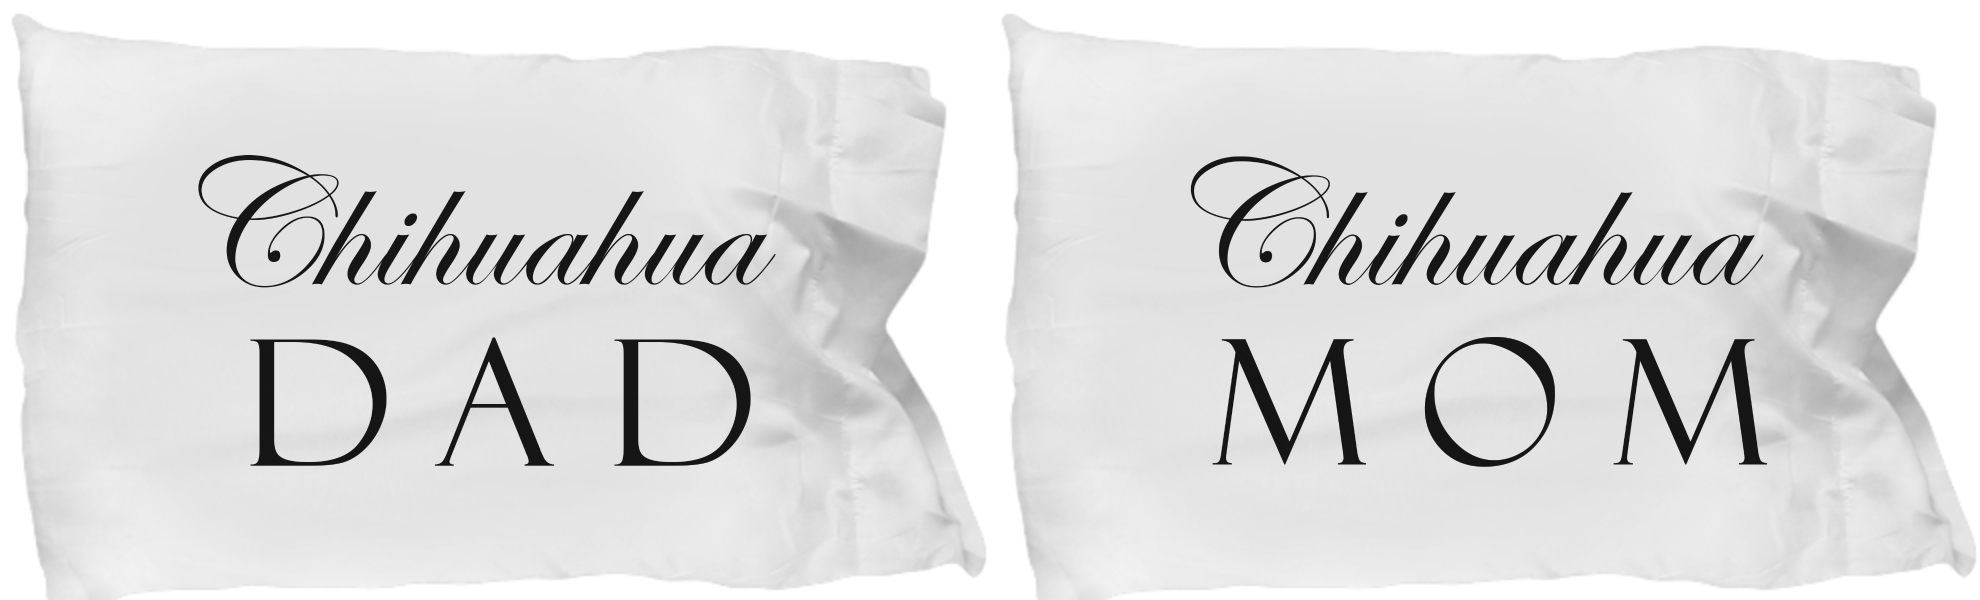 Chihuahua Mom & Dad - Set Of 2 Pillow Cases